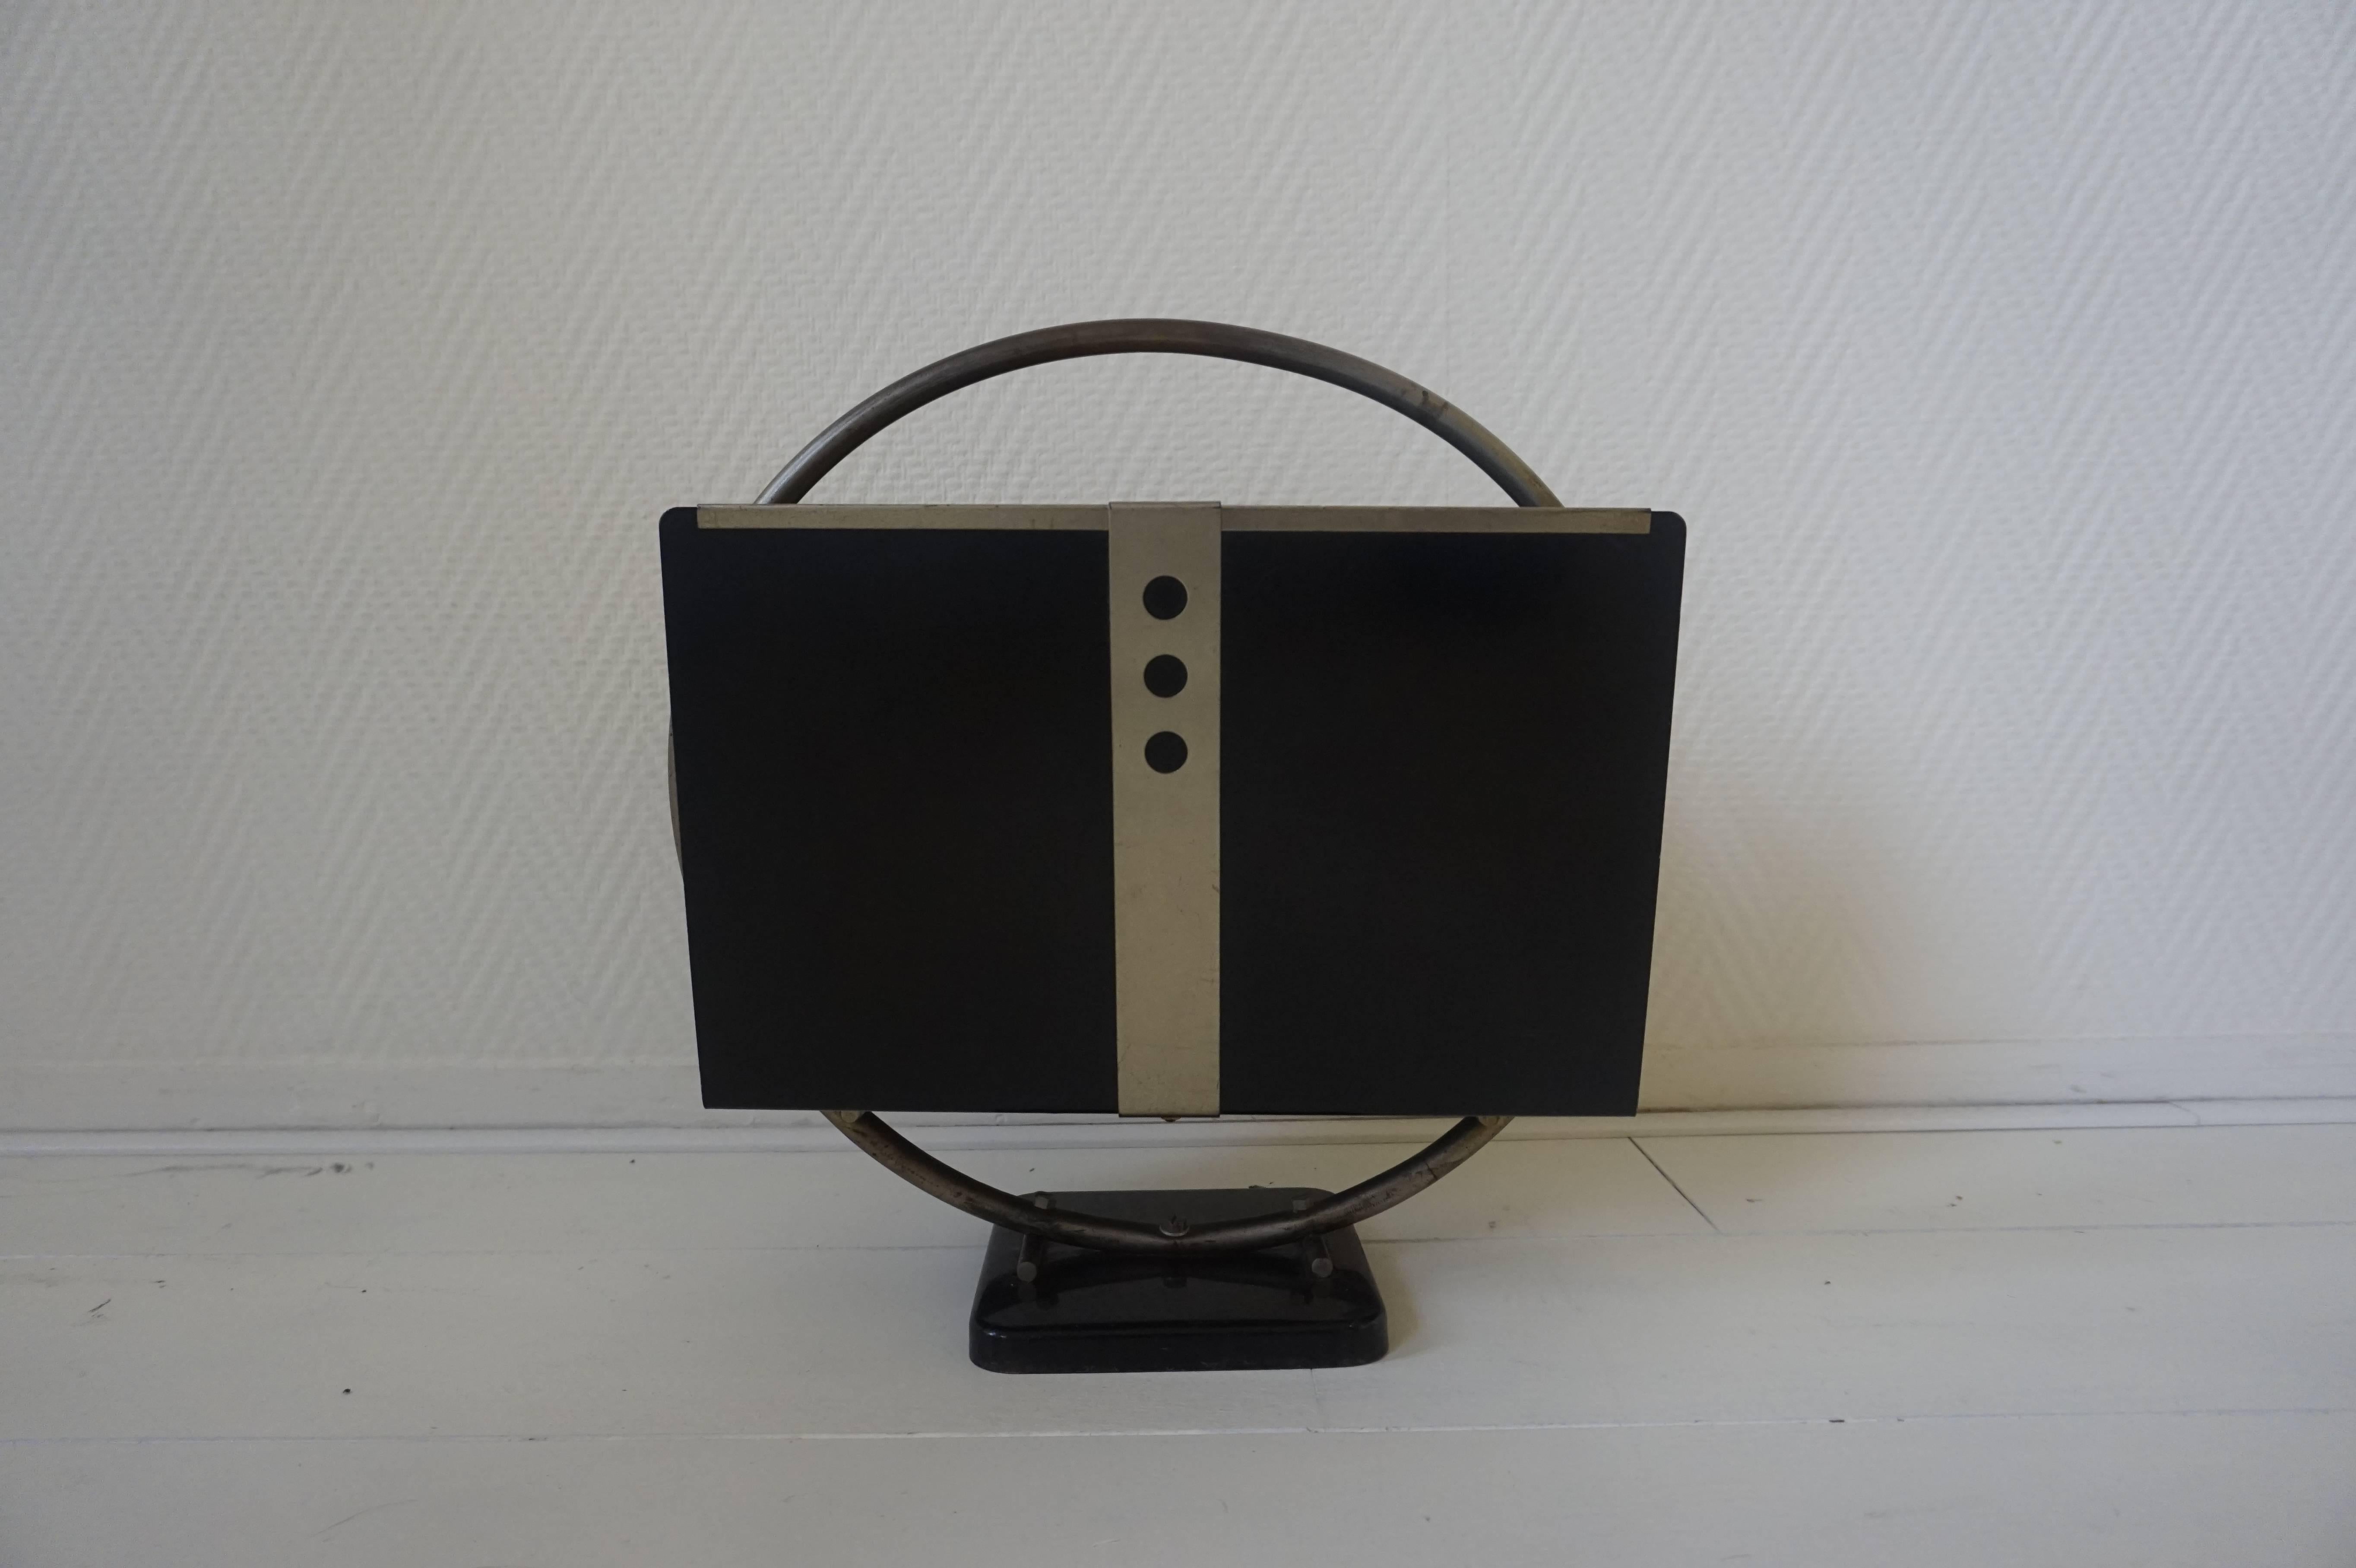 This beautiful Art Deco magazine rack features a high gloss black lacquer finish with metal-line detailing. Reminiscent Gispen designs.

It remains in a good vintage condition with wear consistent with age and use.